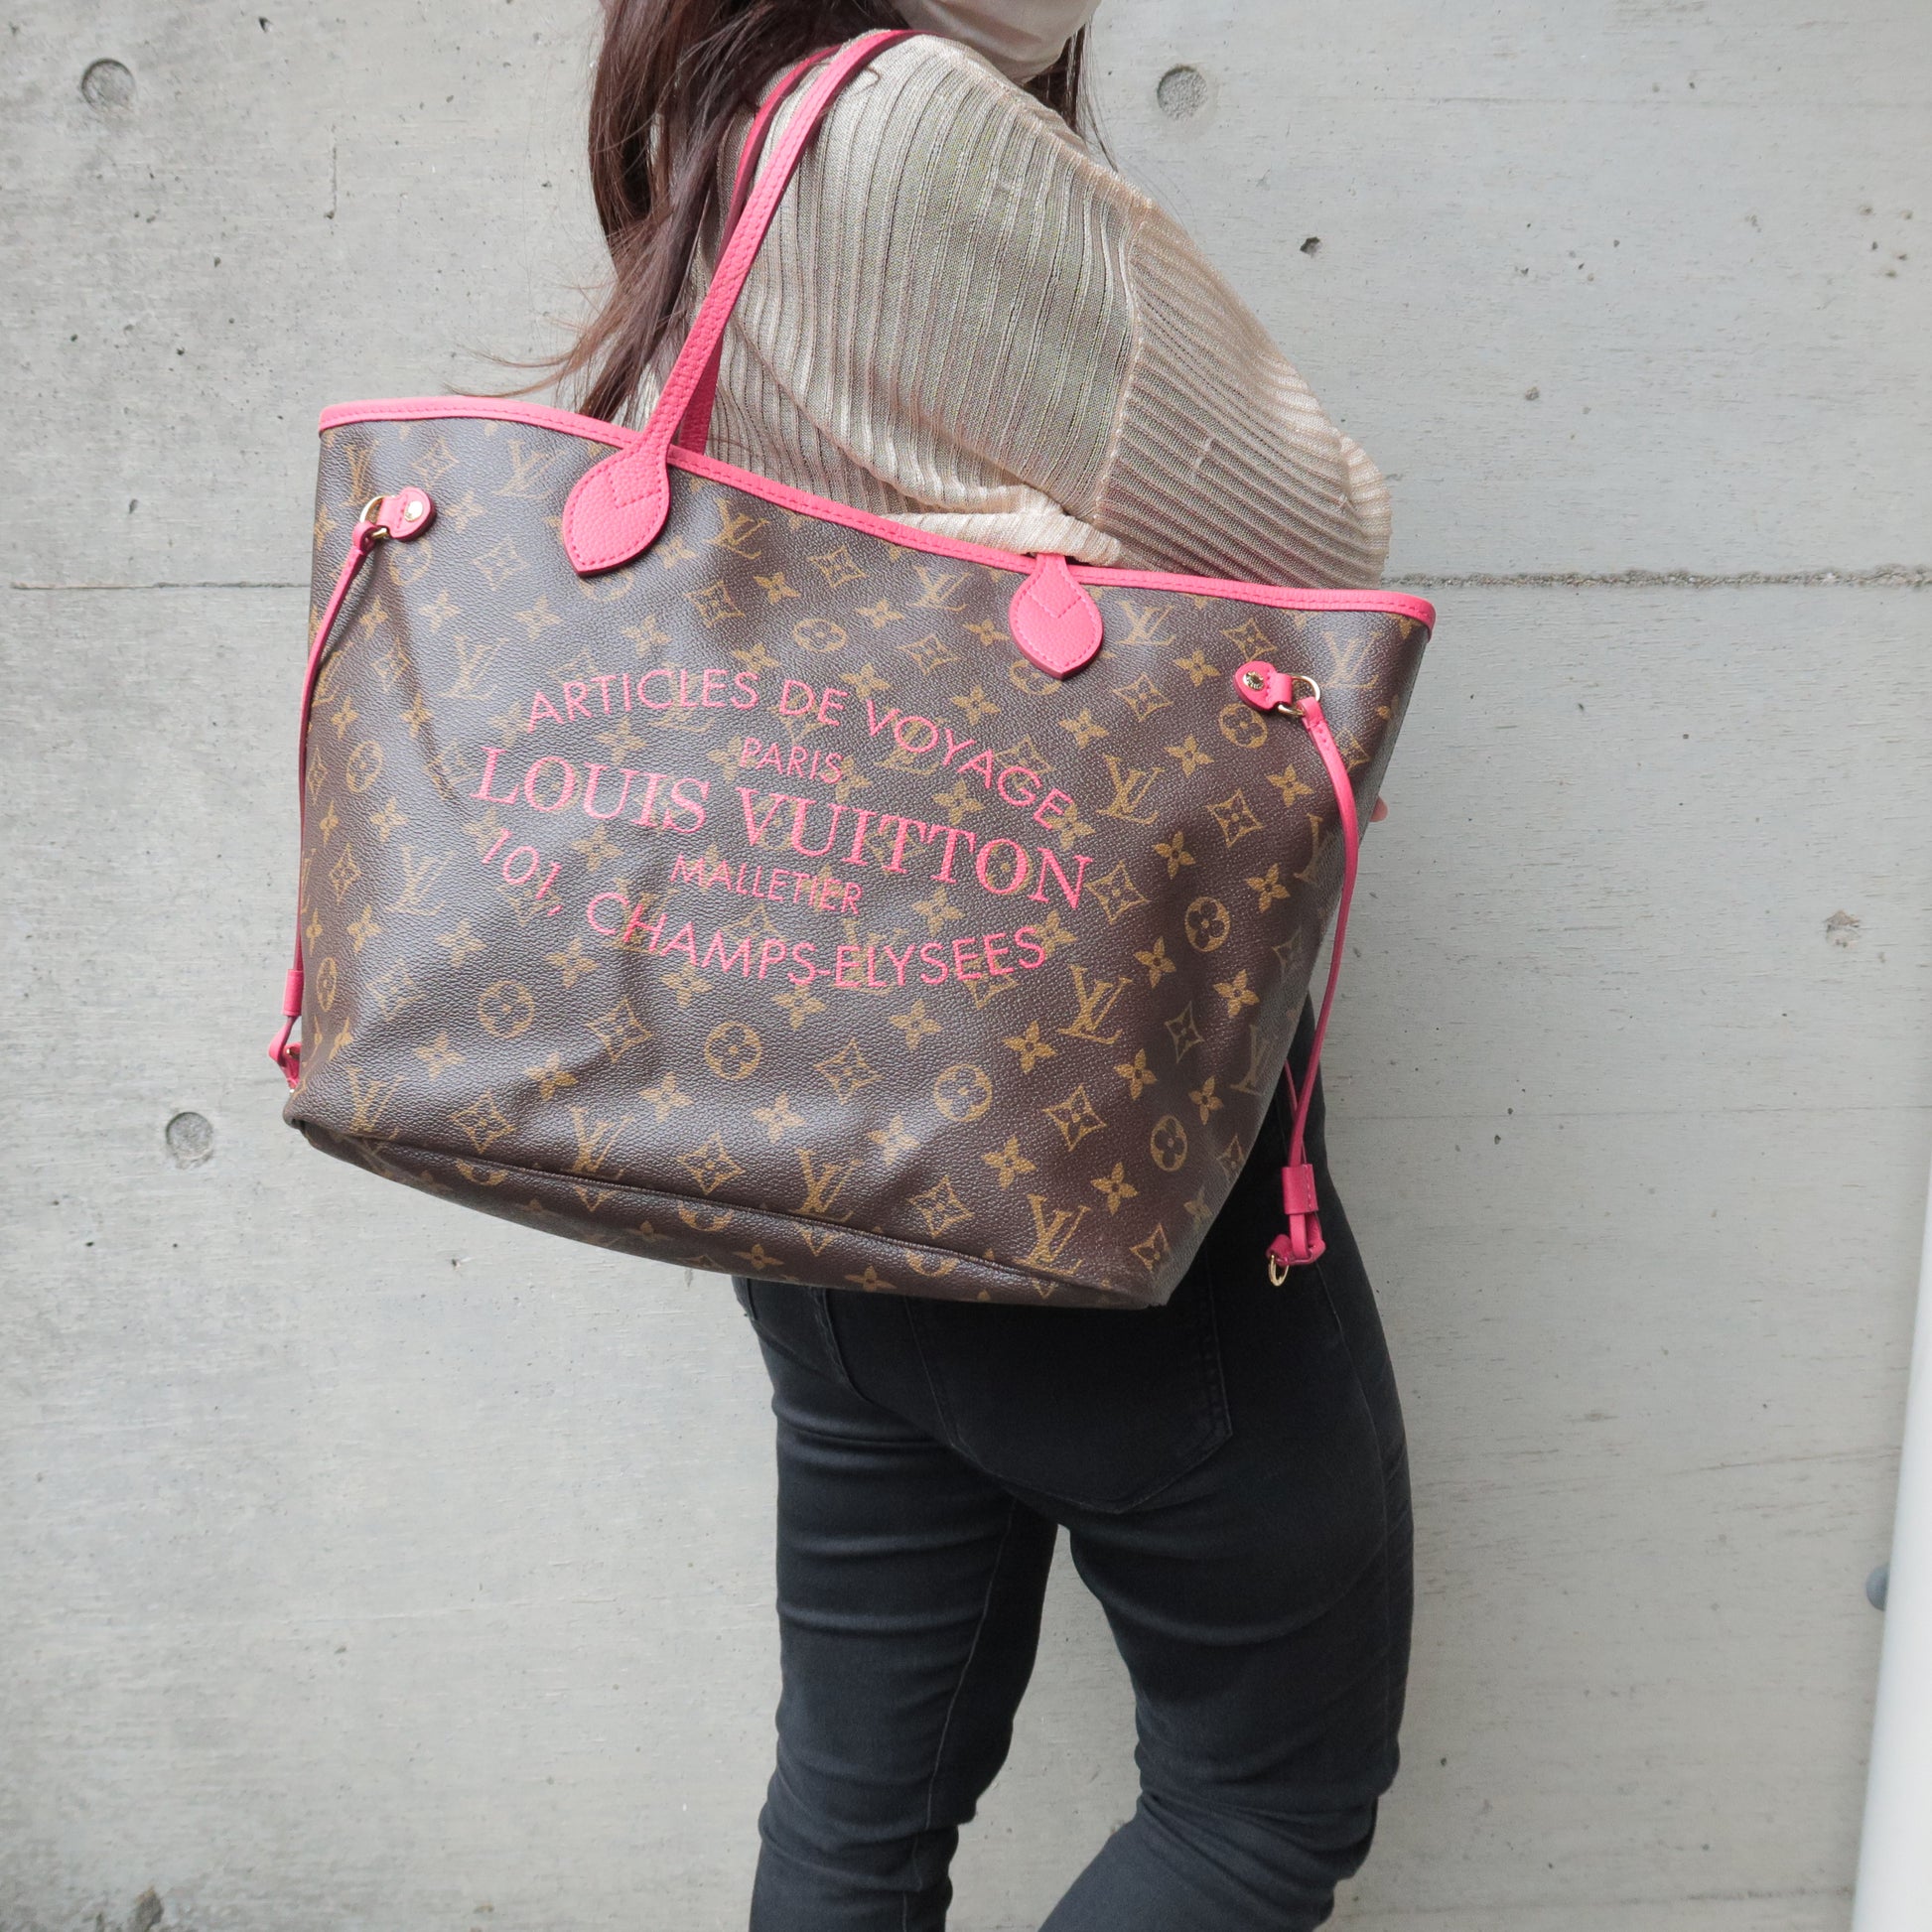 Louis Vuitton 2020 Pre-owned Neverfull Tote Bag